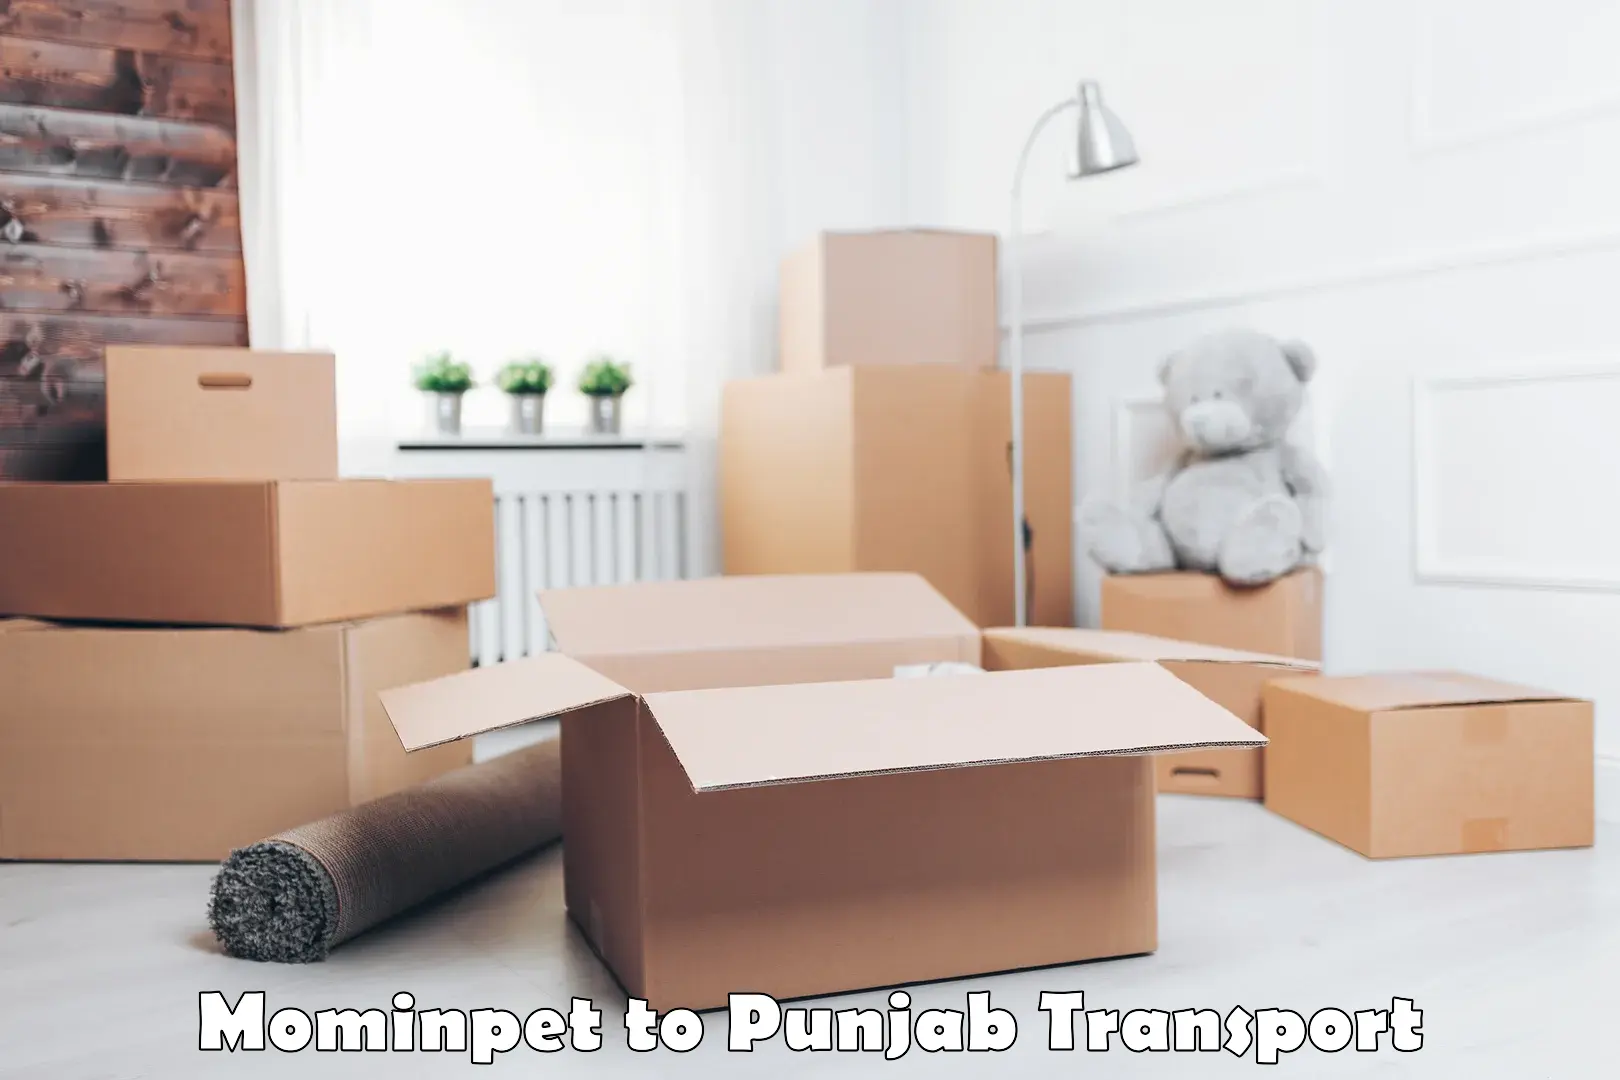 Nearby transport service Mominpet to Ludhiana